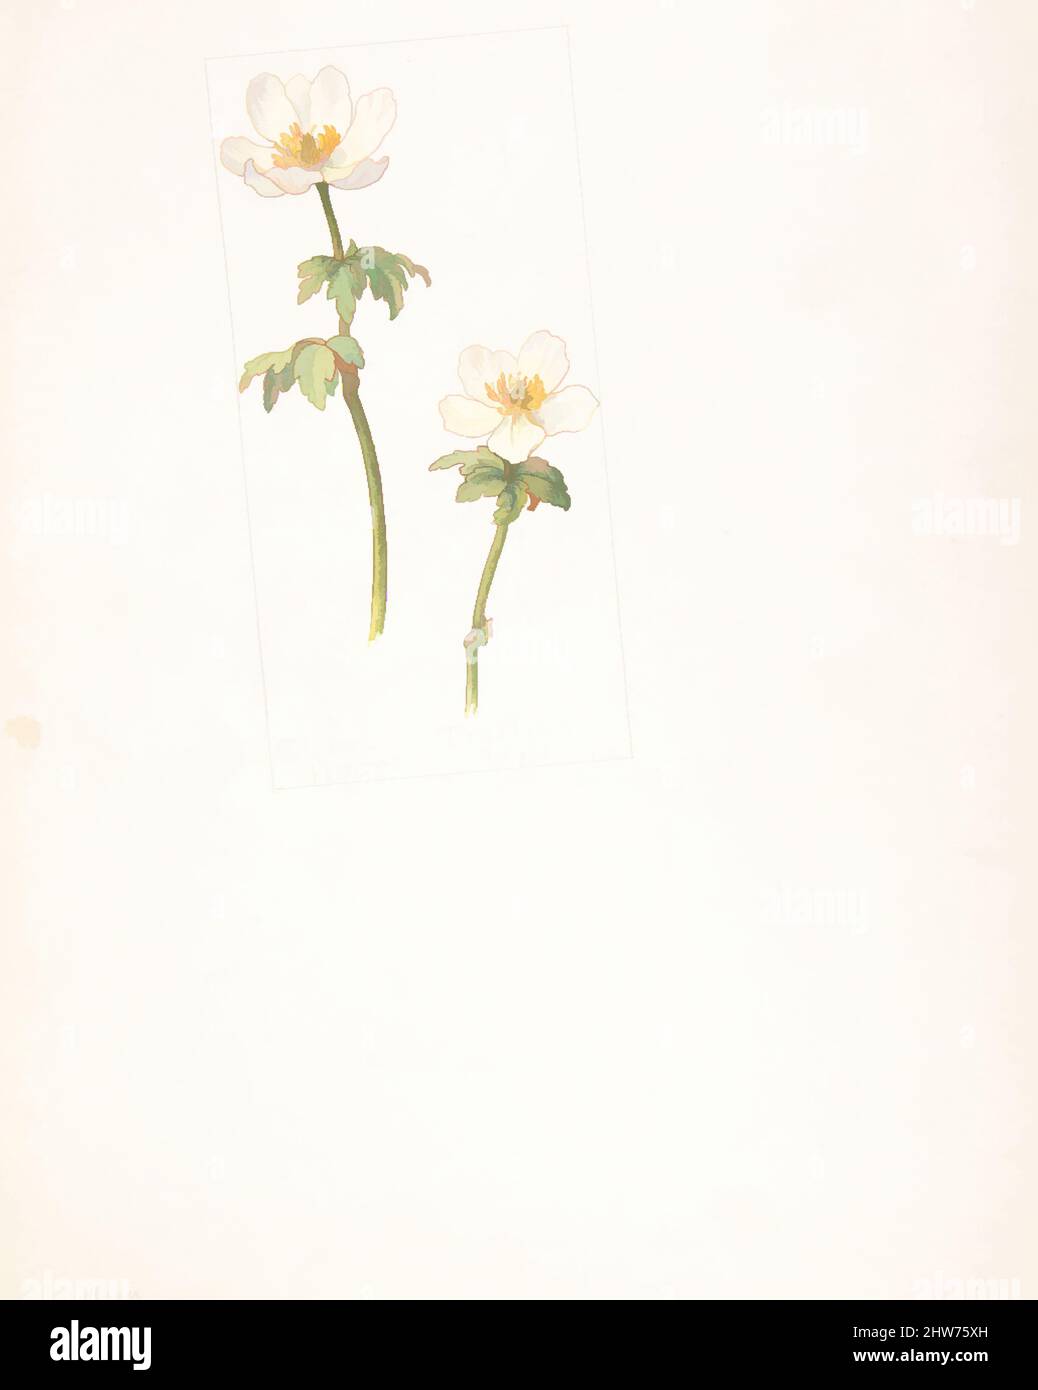 Art inspired by Globe flower, Trollius laxus, June 26, 1909, Watercolor and brown ink over graphite, with page design indicated in graphite, sheet: 13 11/16 x 9 15/16 in. (34.8 x 25.2 cm), Drawings, Margaret Neilson Armstrong (American, New York 1867–1944 New York, Classic works modernized by Artotop with a splash of modernity. Shapes, color and value, eye-catching visual impact on art. Emotions through freedom of artworks in a contemporary way. A timeless message pursuing a wildly creative new direction. Artists turning to the digital medium and creating the Artotop NFT Stock Photo